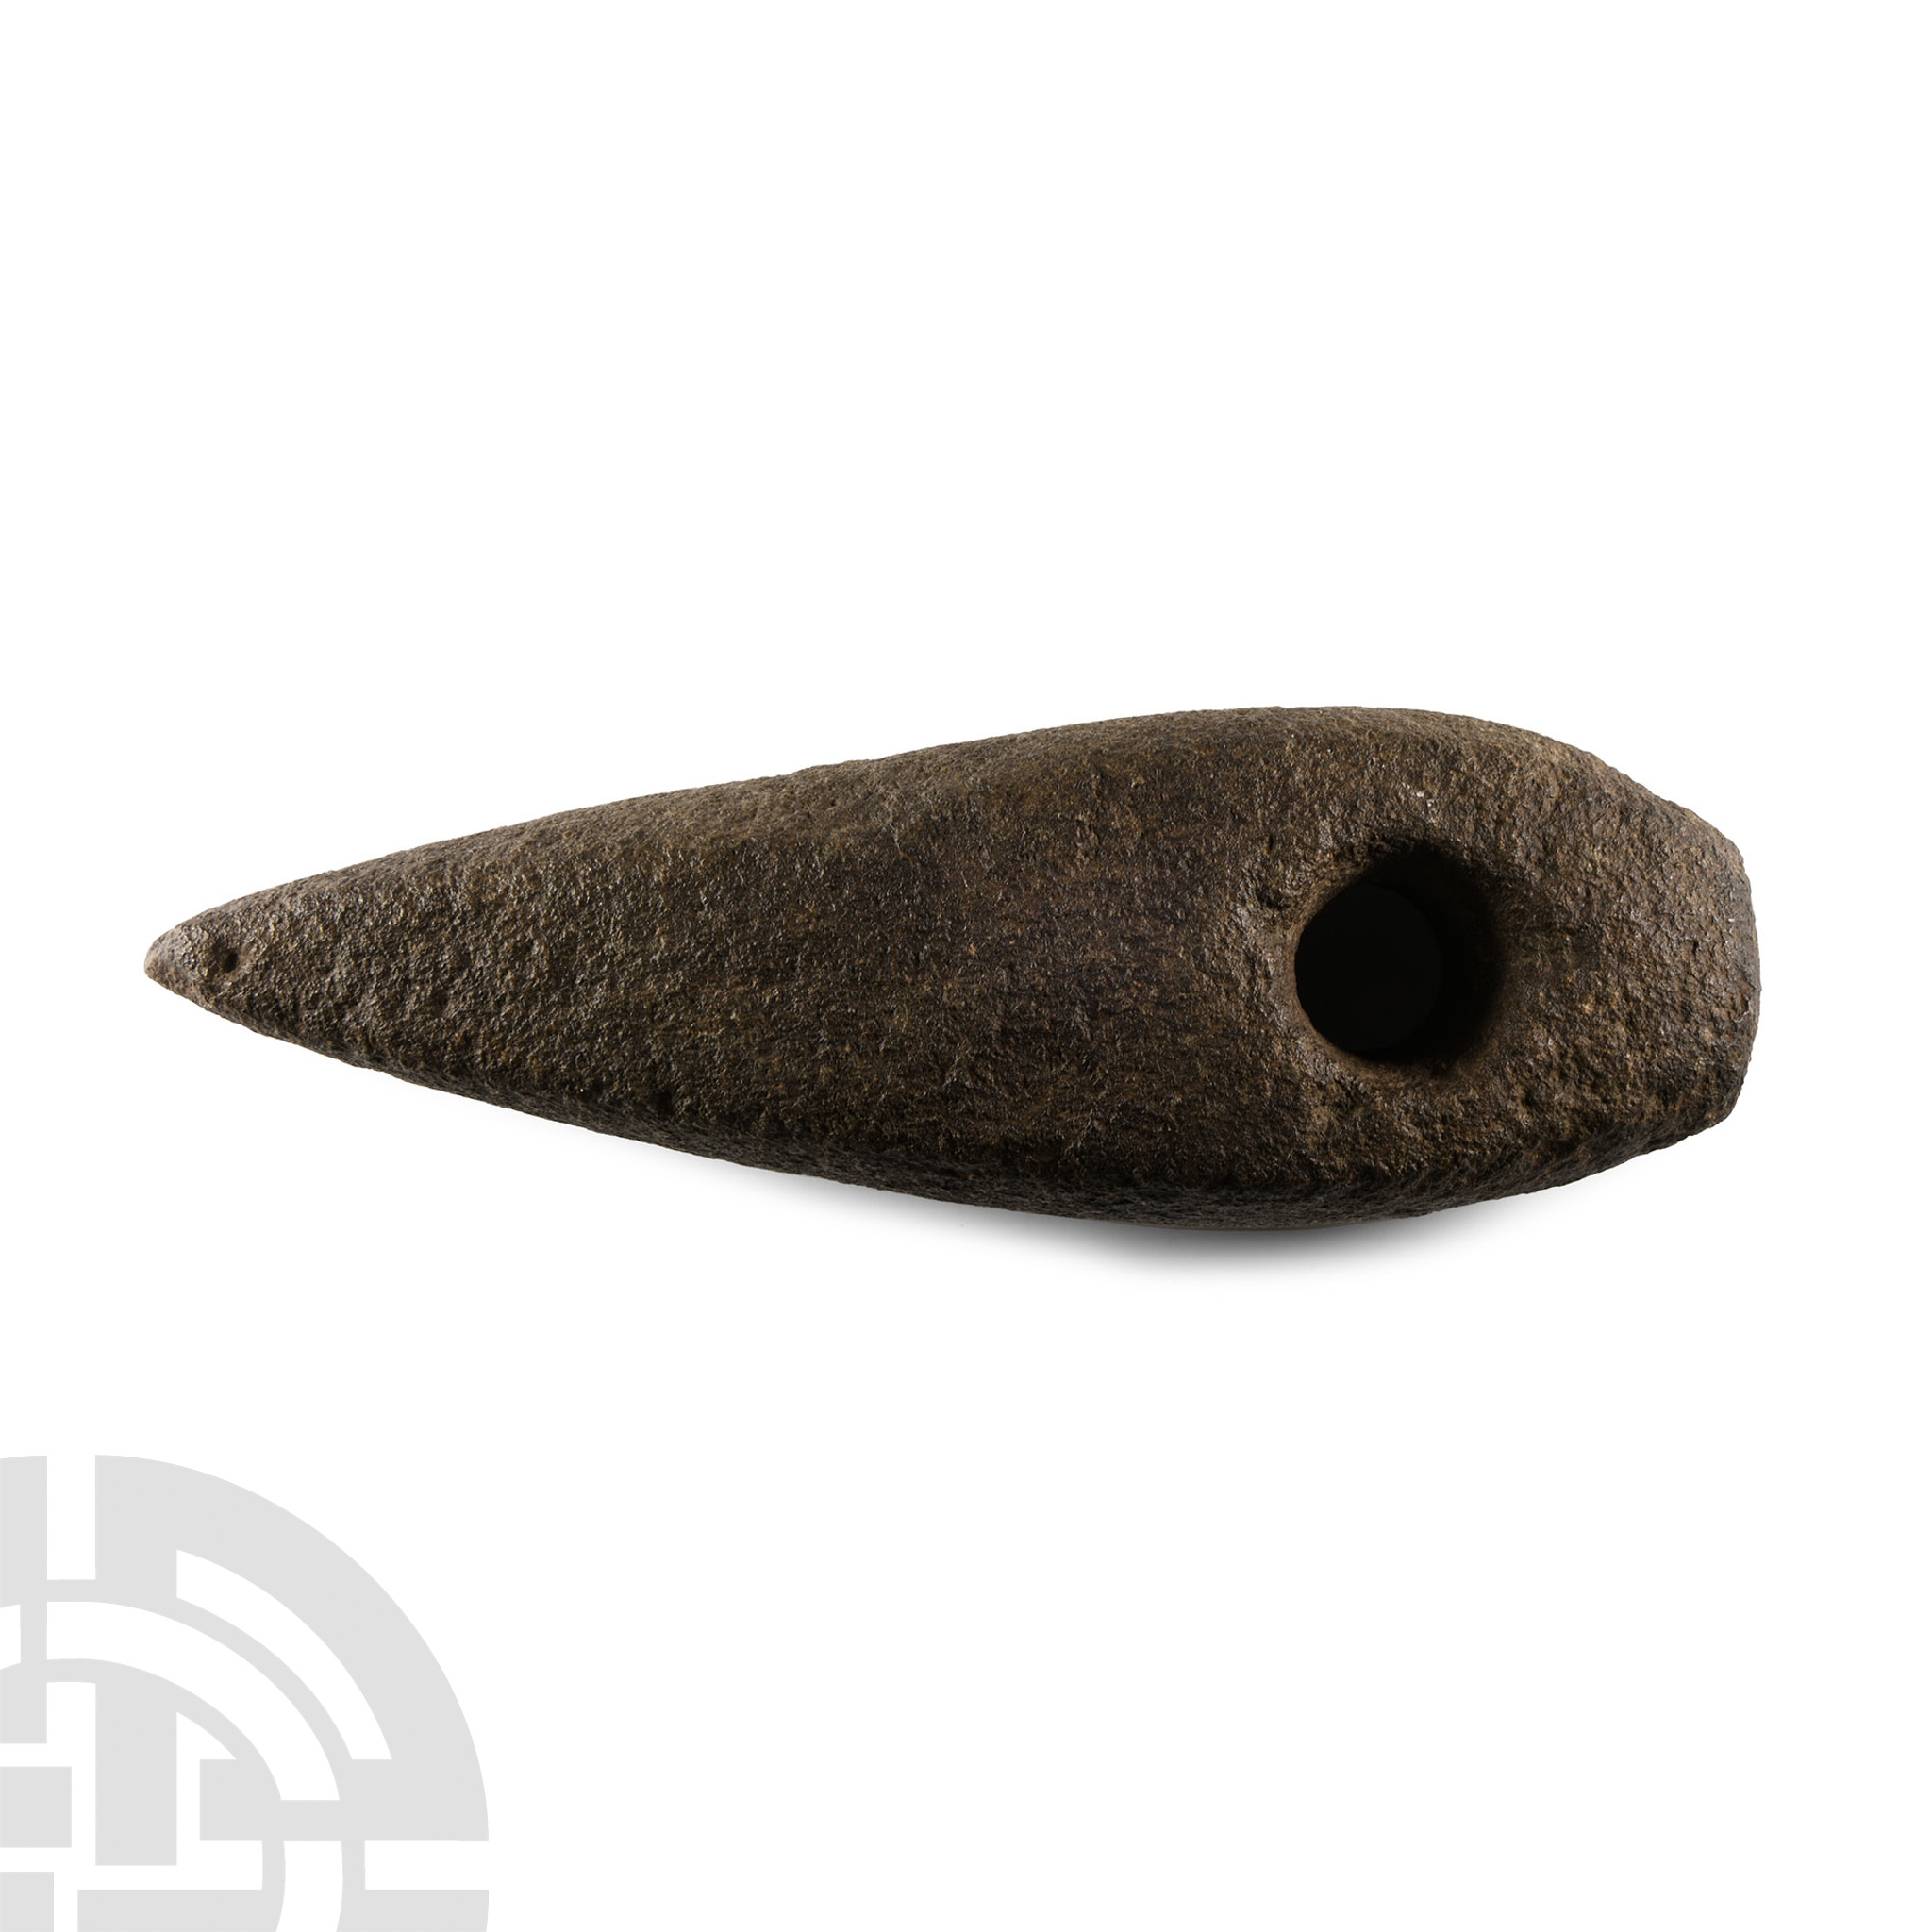 Large Stone Age Pierced Boat-Shaped Axehead - Image 2 of 3